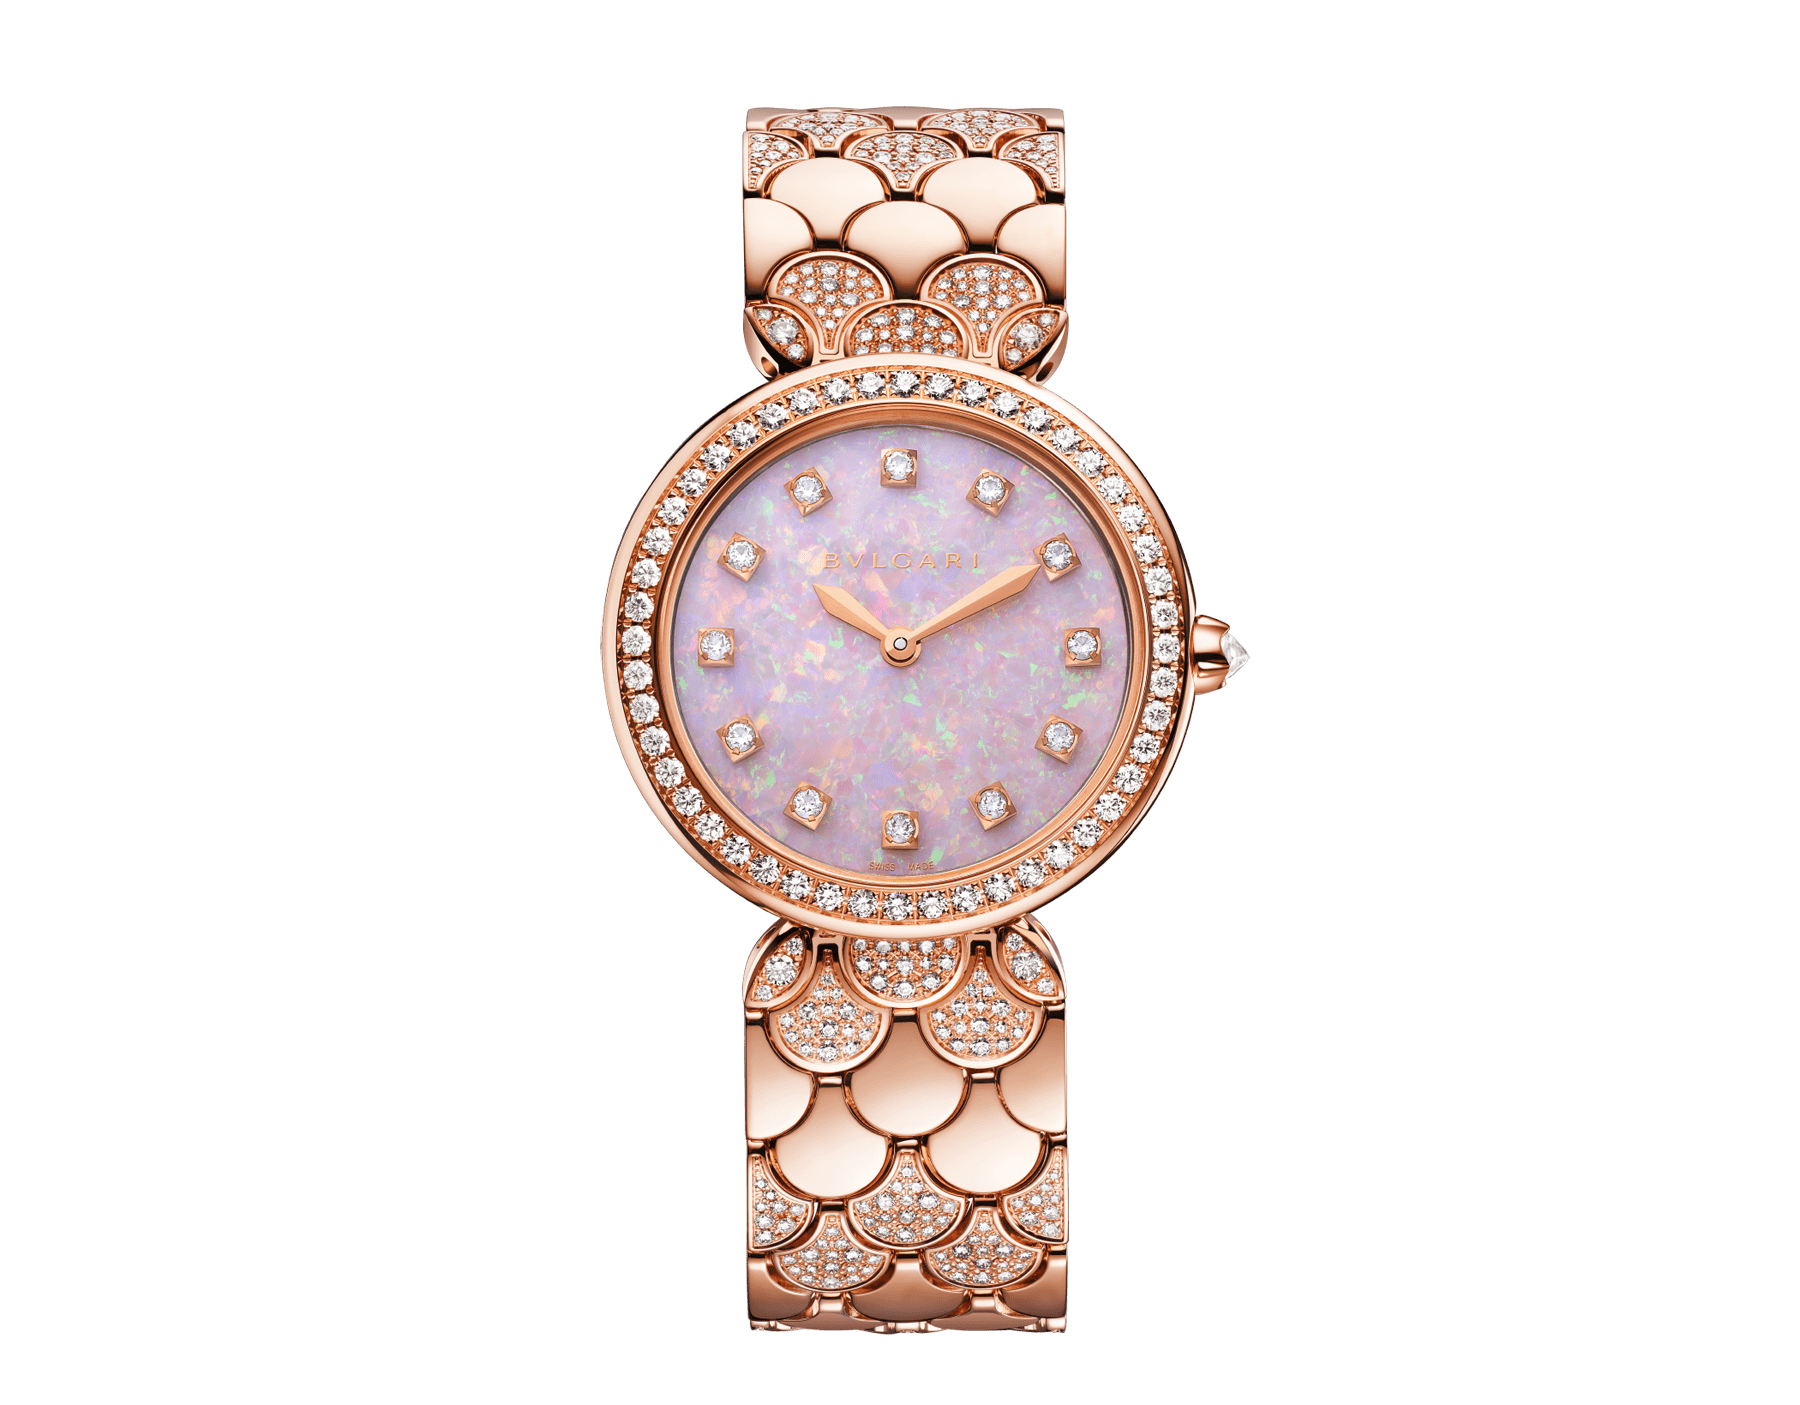 DIVAS' DREAM watch featuring a 18 kt rose gold case and bracelet set with brilliant-cut diamonds, pink opal dial and 12 diamond indexes. Water-resistant up to 30 metres 103647 image 1